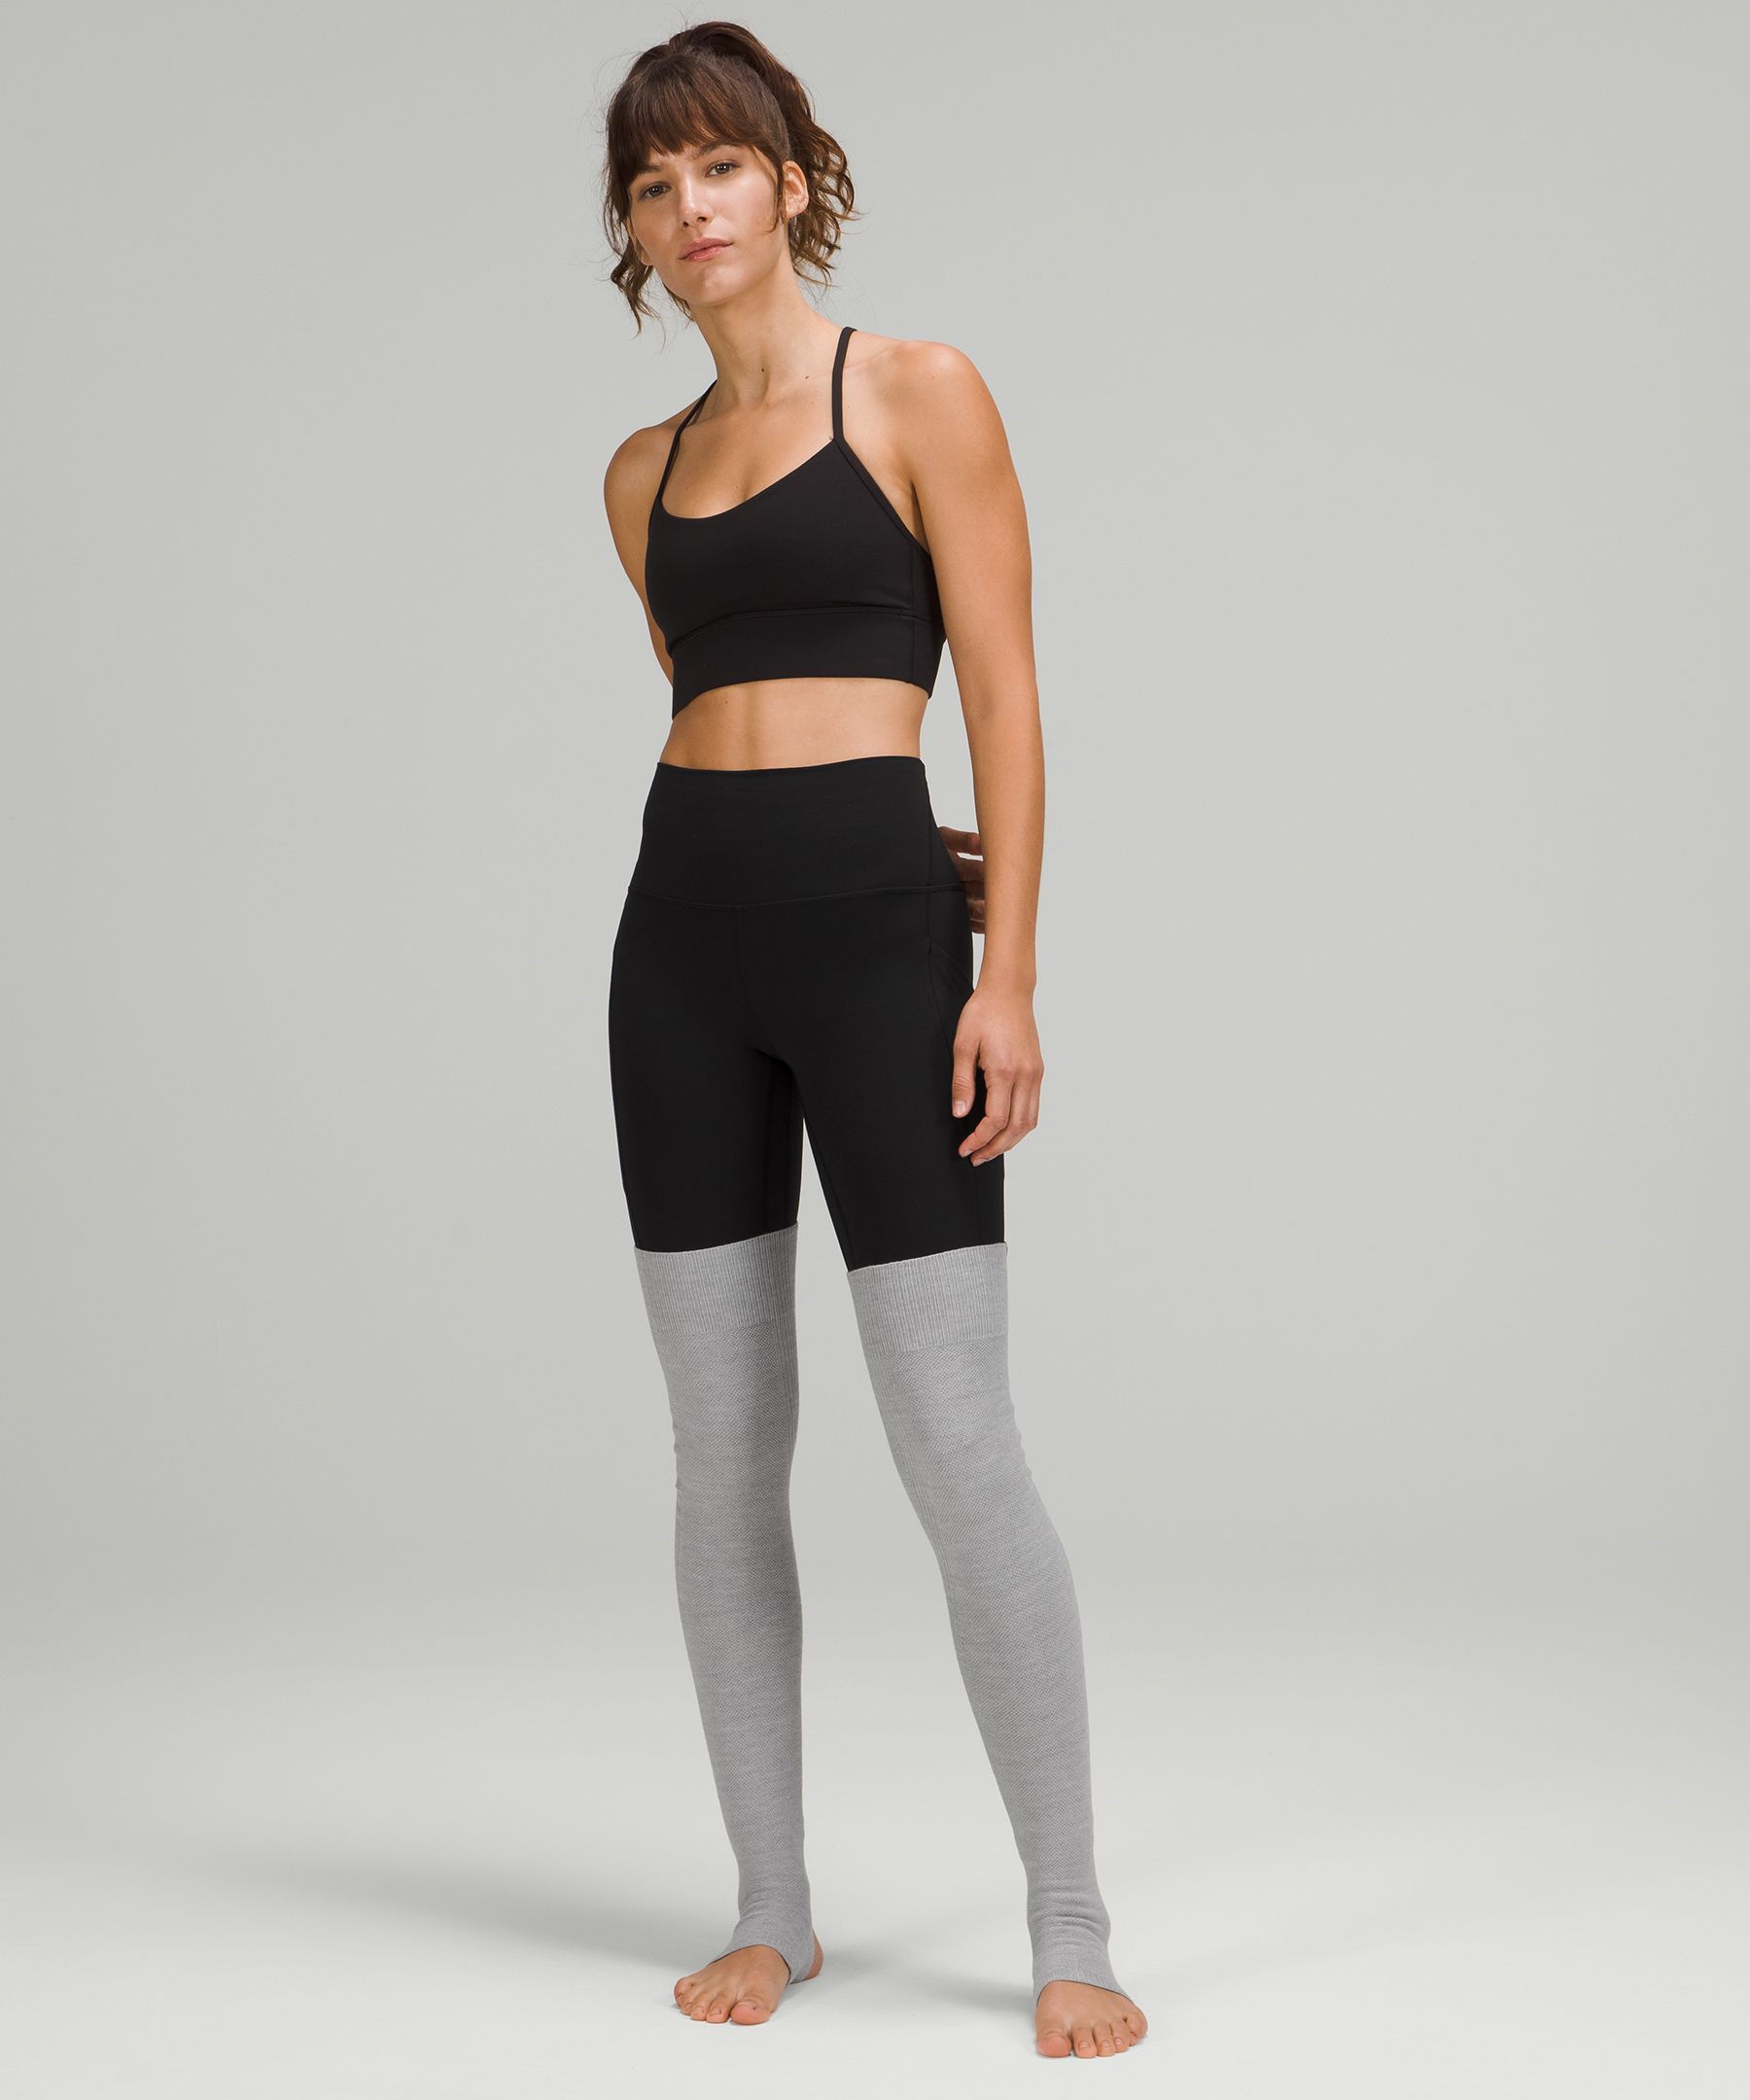 Lululemon releases ad for new Full-On yoga pants made from 'evolved fabric